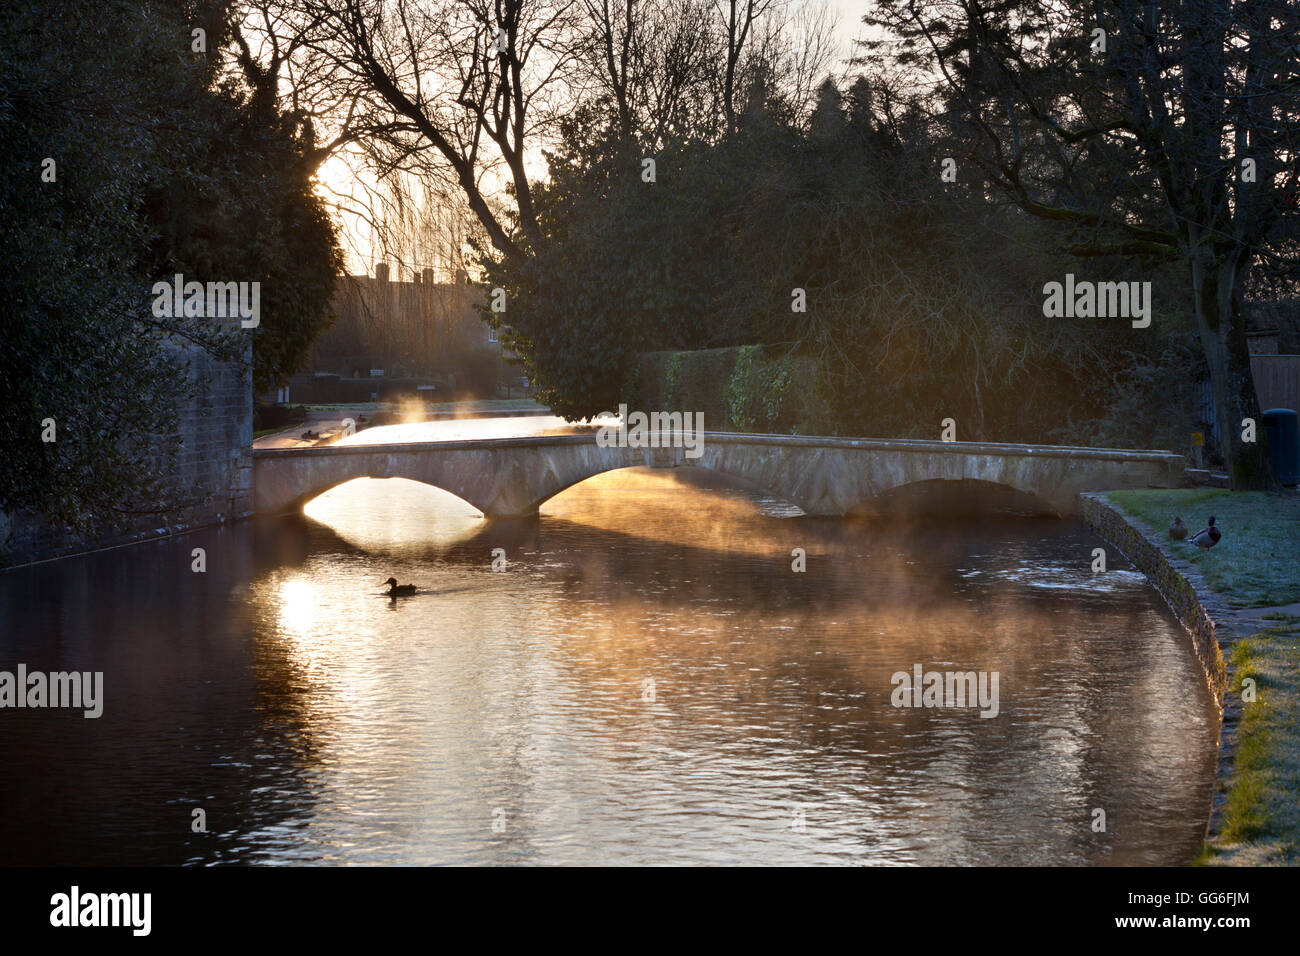 Cotswold stone bridge over River Windrush in mist, Bourton-on-the-Water, Cotswolds, Gloucestershire, England, United Kingdom Stock Photo